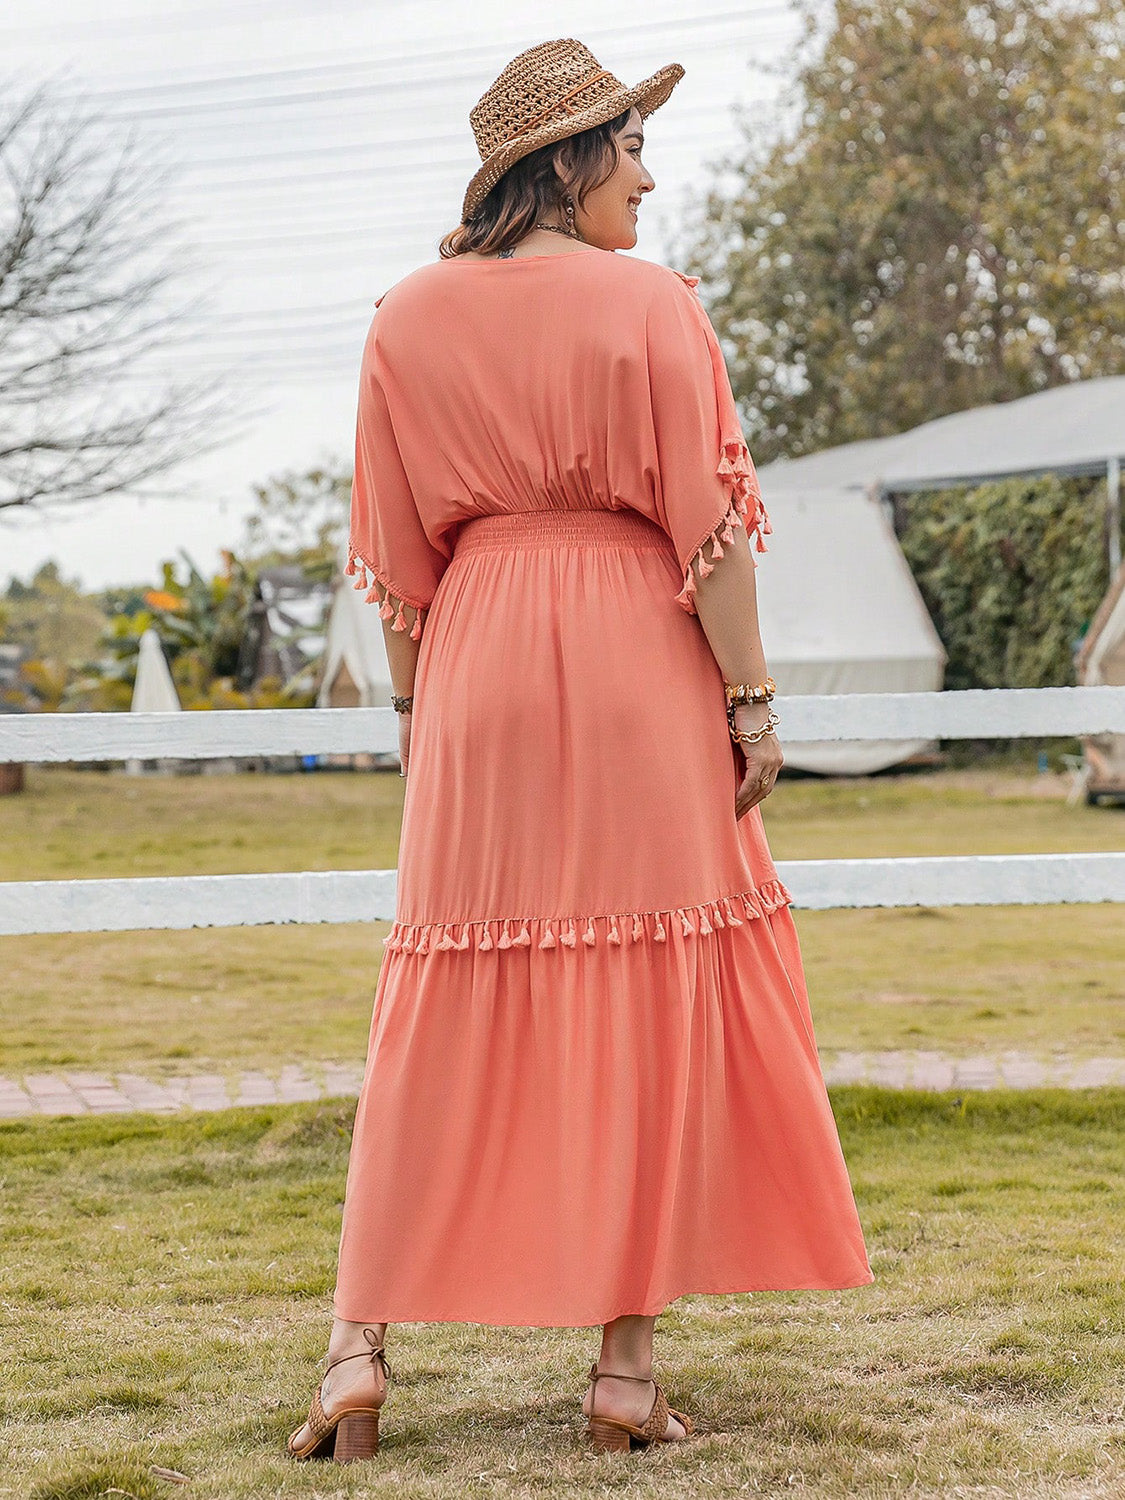 Elegant Plus Size Beach Wedding Guest Dress with Tassel Trim, V-Neck, Short Sleeves, and Ruffle Hem - Perfect for Stylish Summer Events